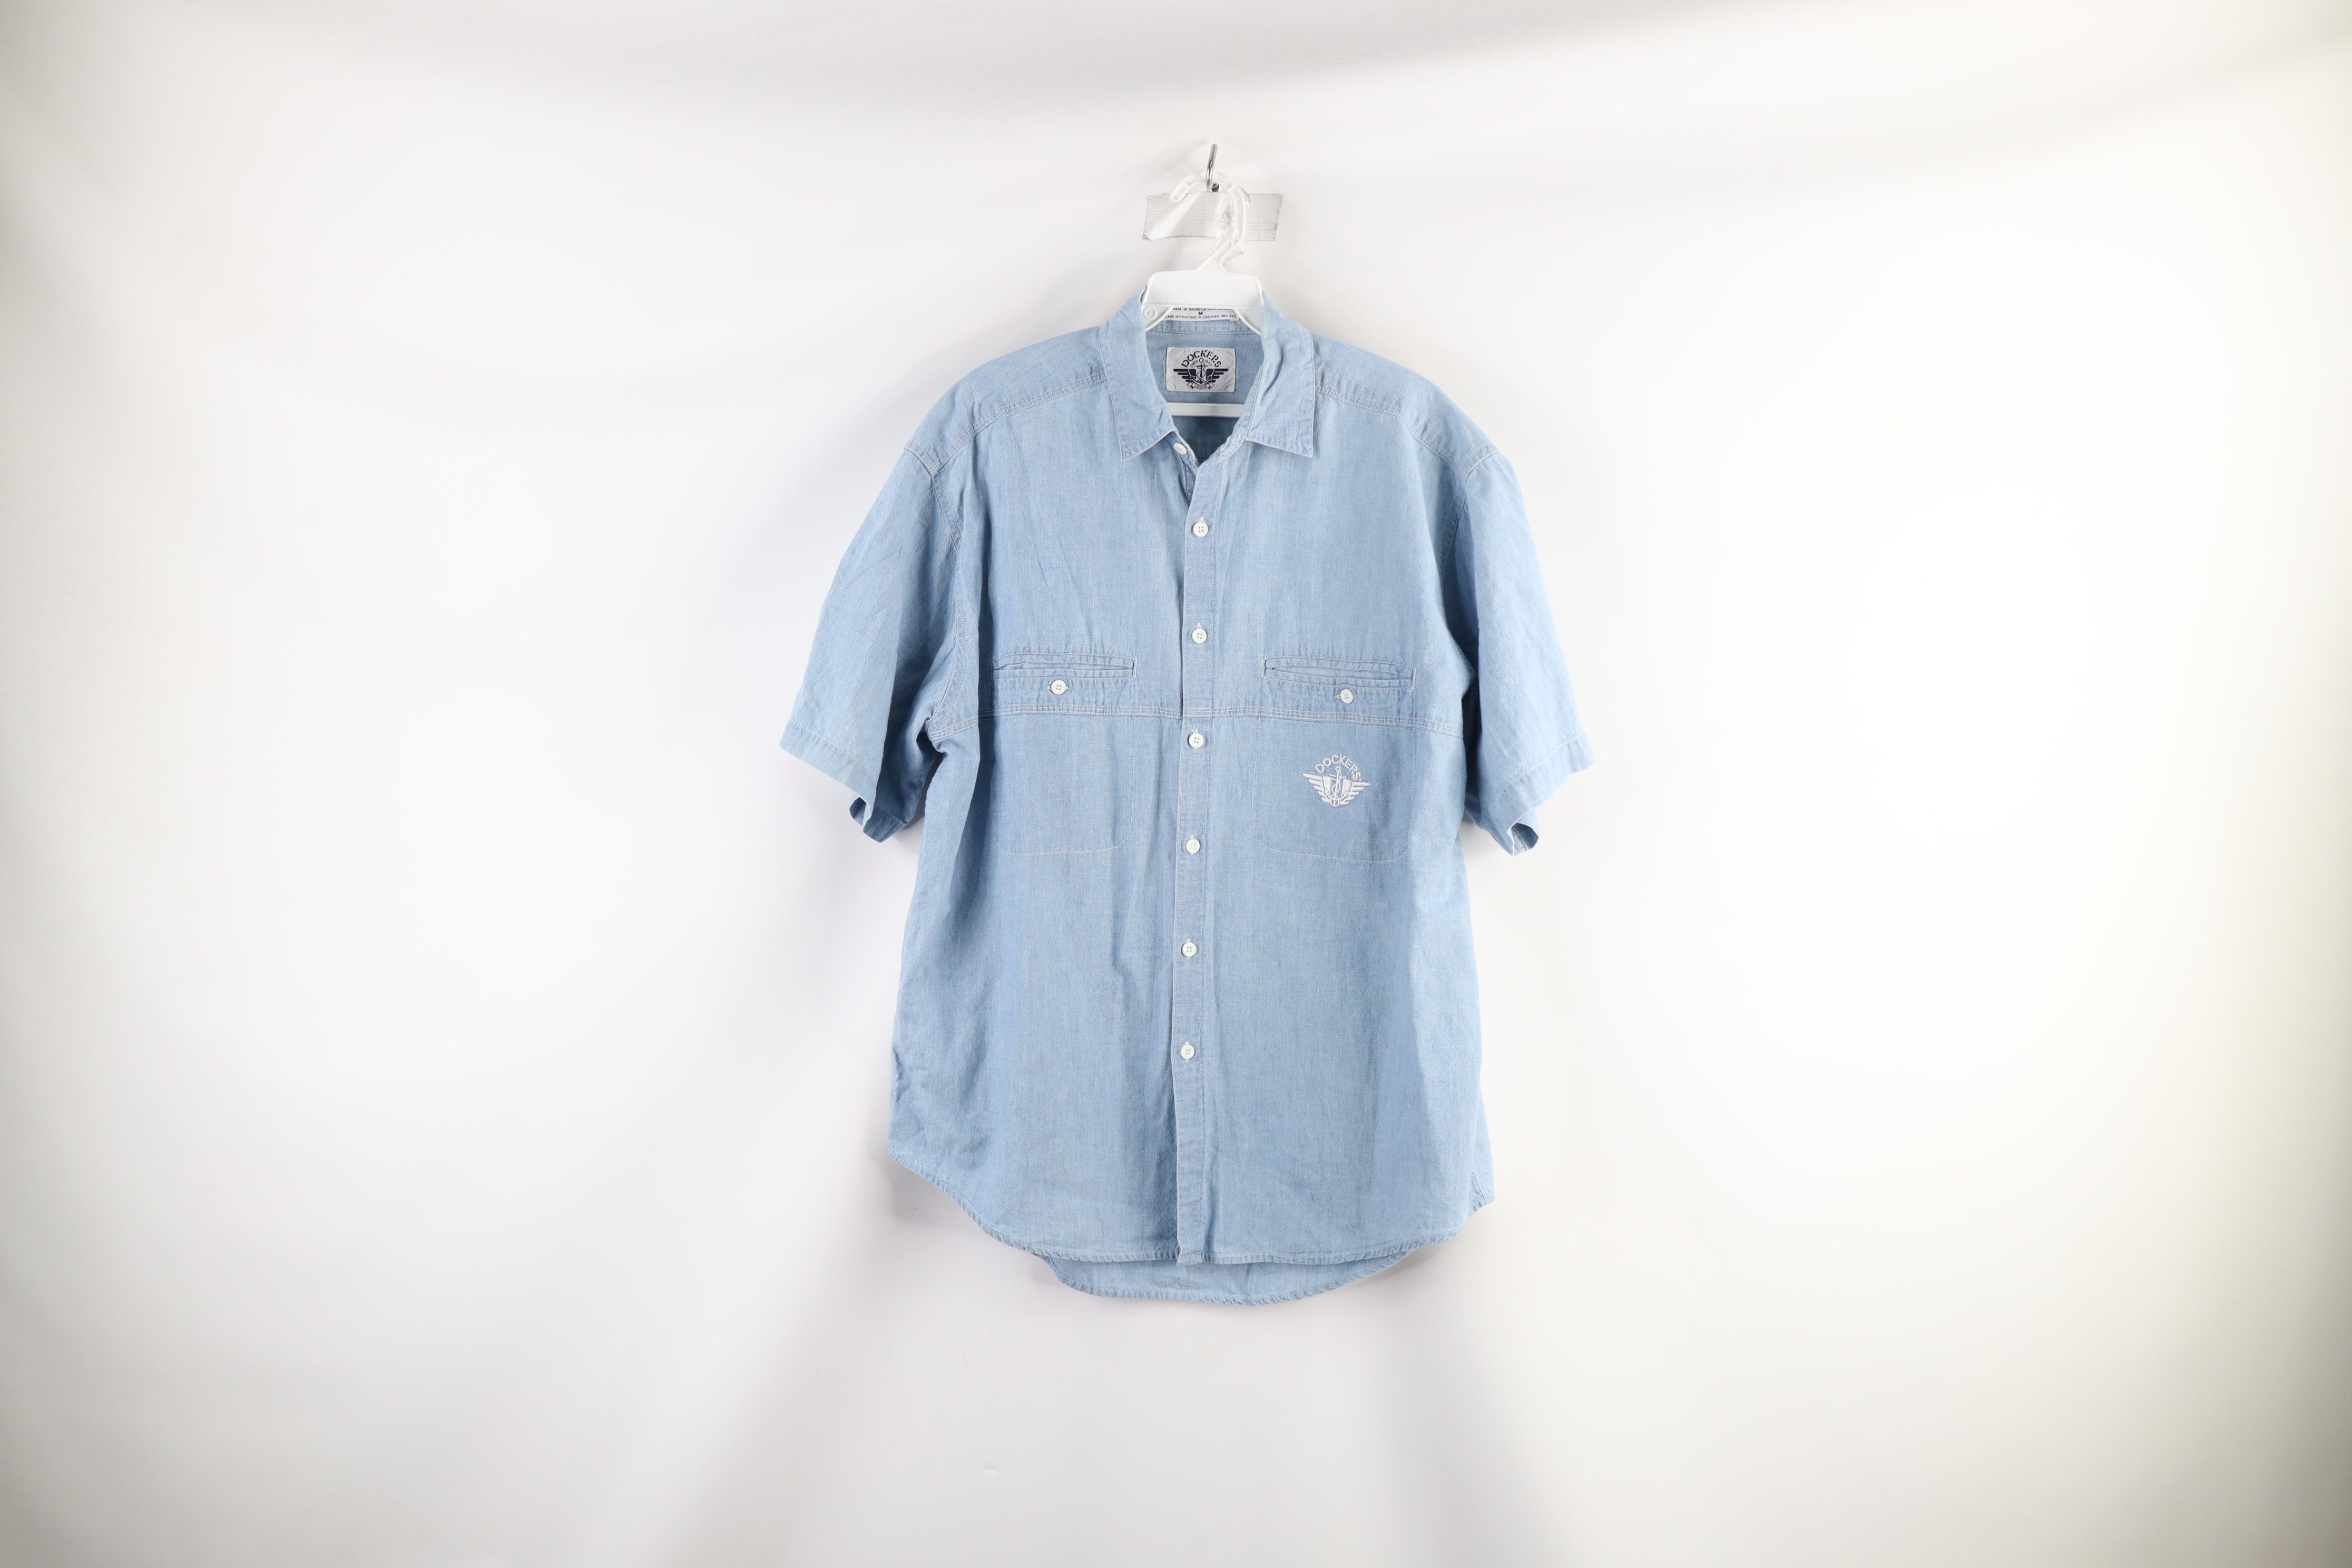 Vintage Vintage 90s Dockers Chambray Short Sleeve Button Shirt Size US M / EU 48-50 / 2 - 1 Preview